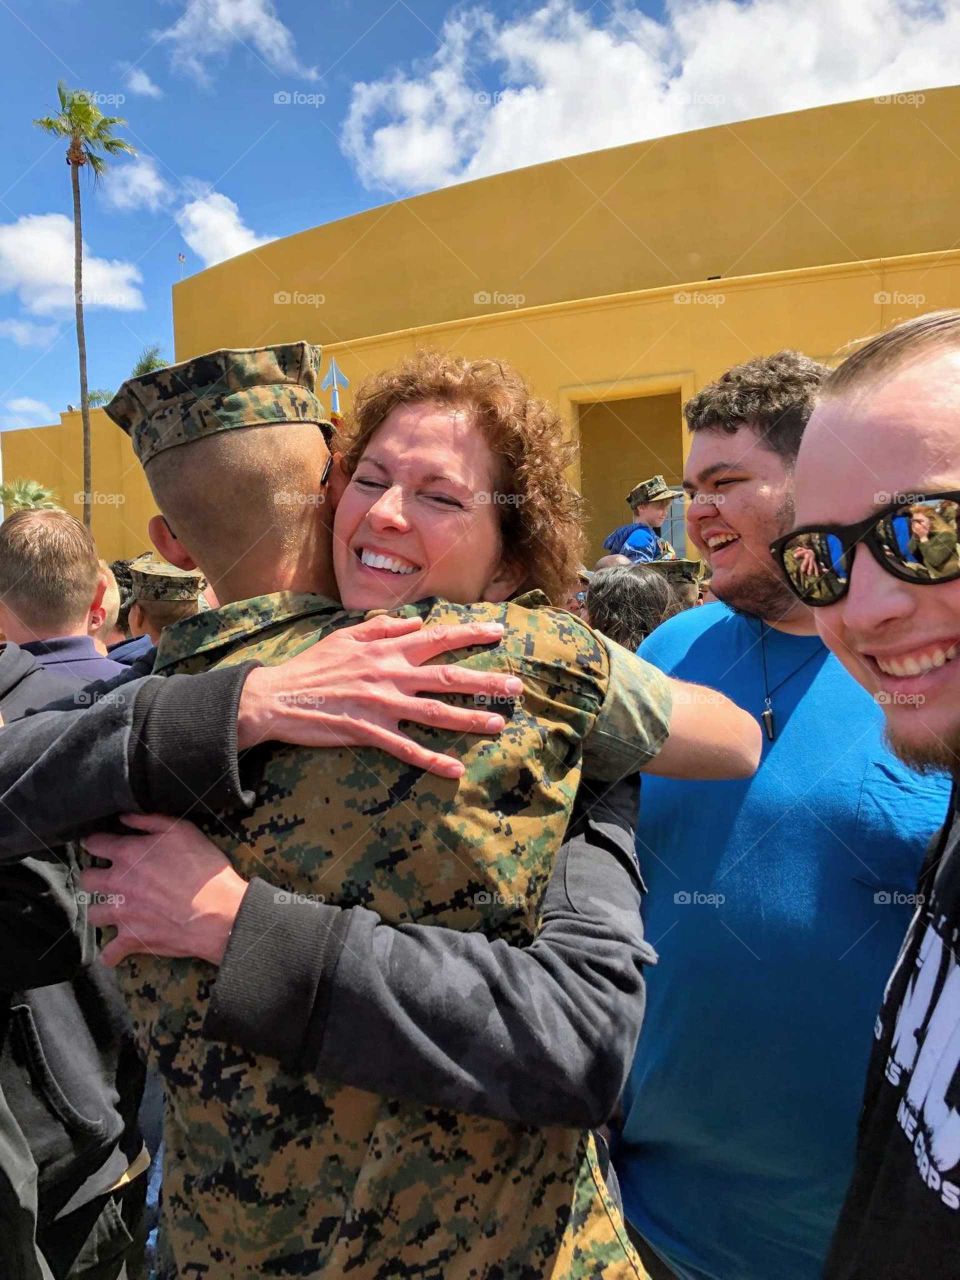 Seeing my new Marine for the first time after three months. Proud.